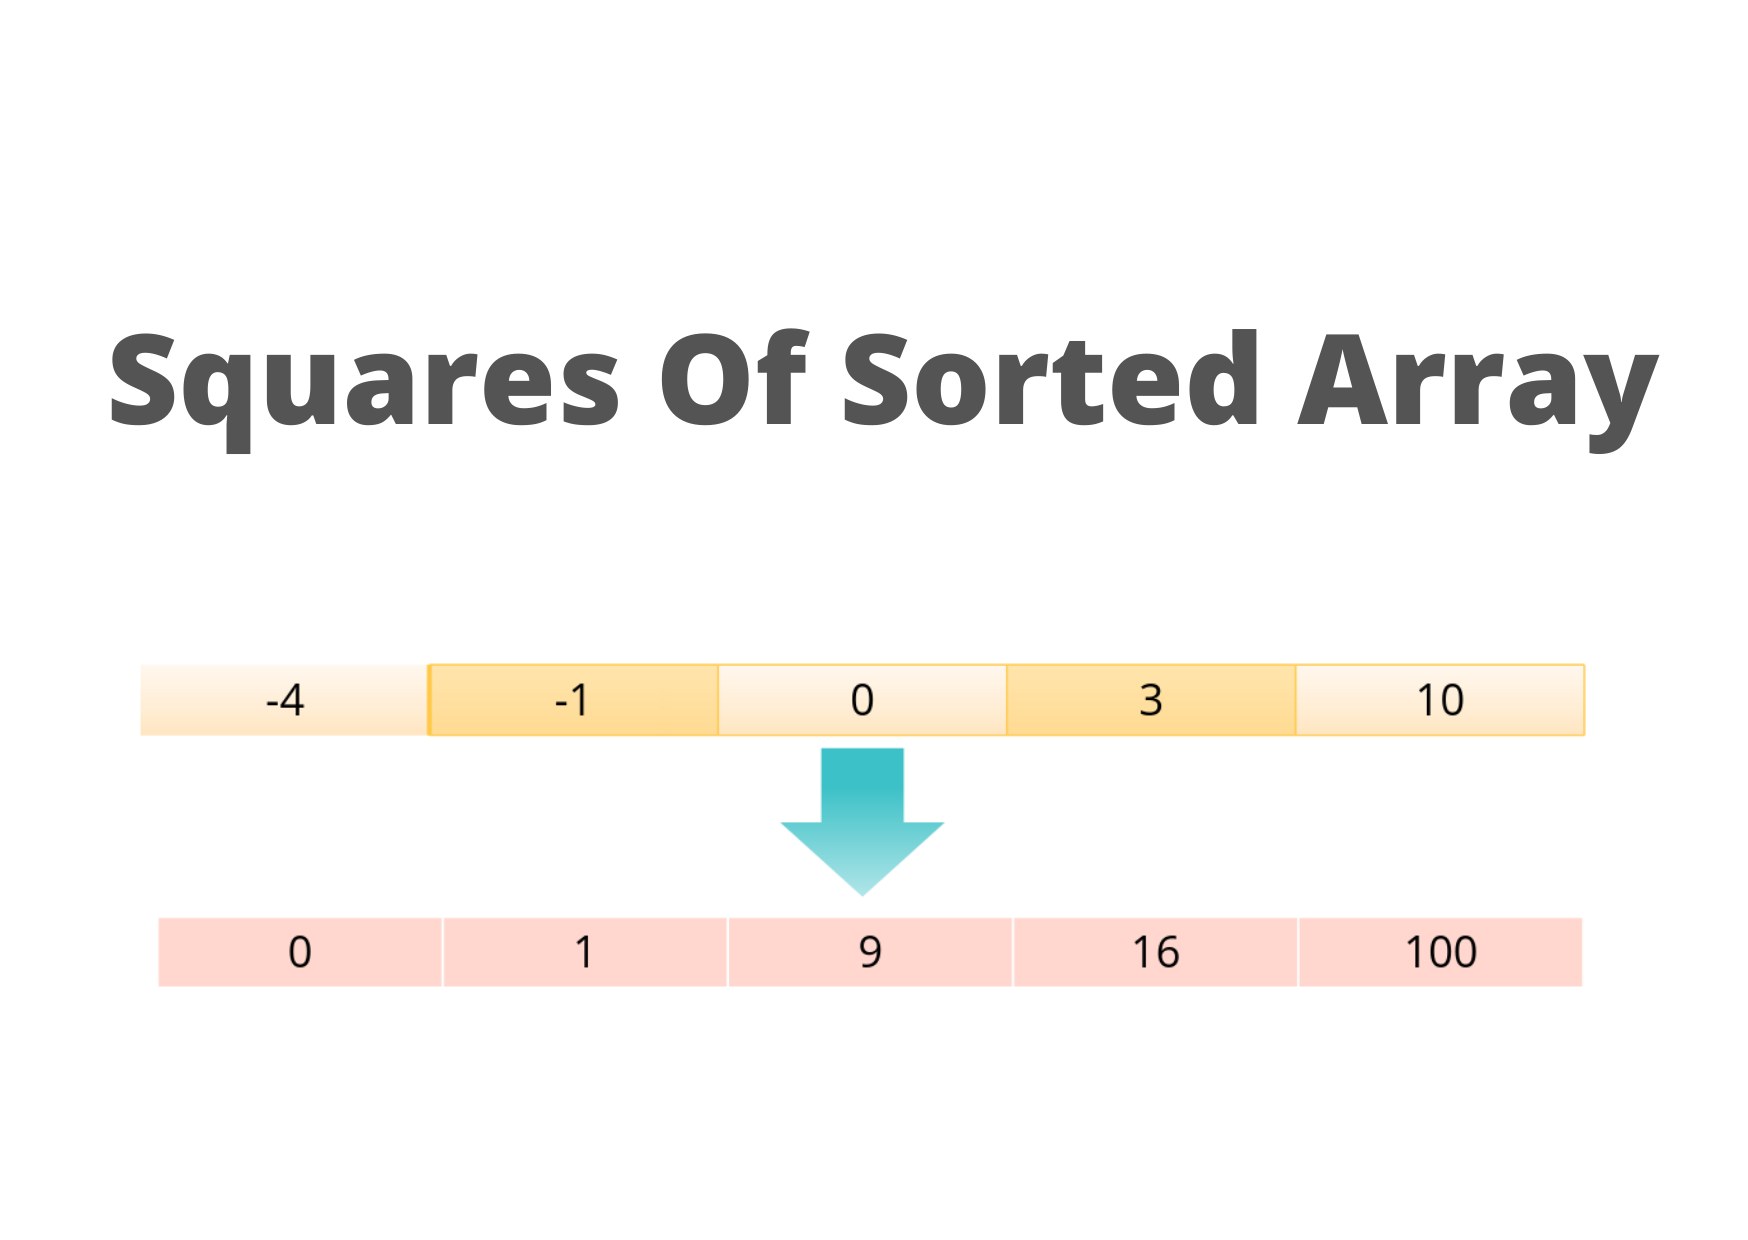 Squares of a Sorted Array